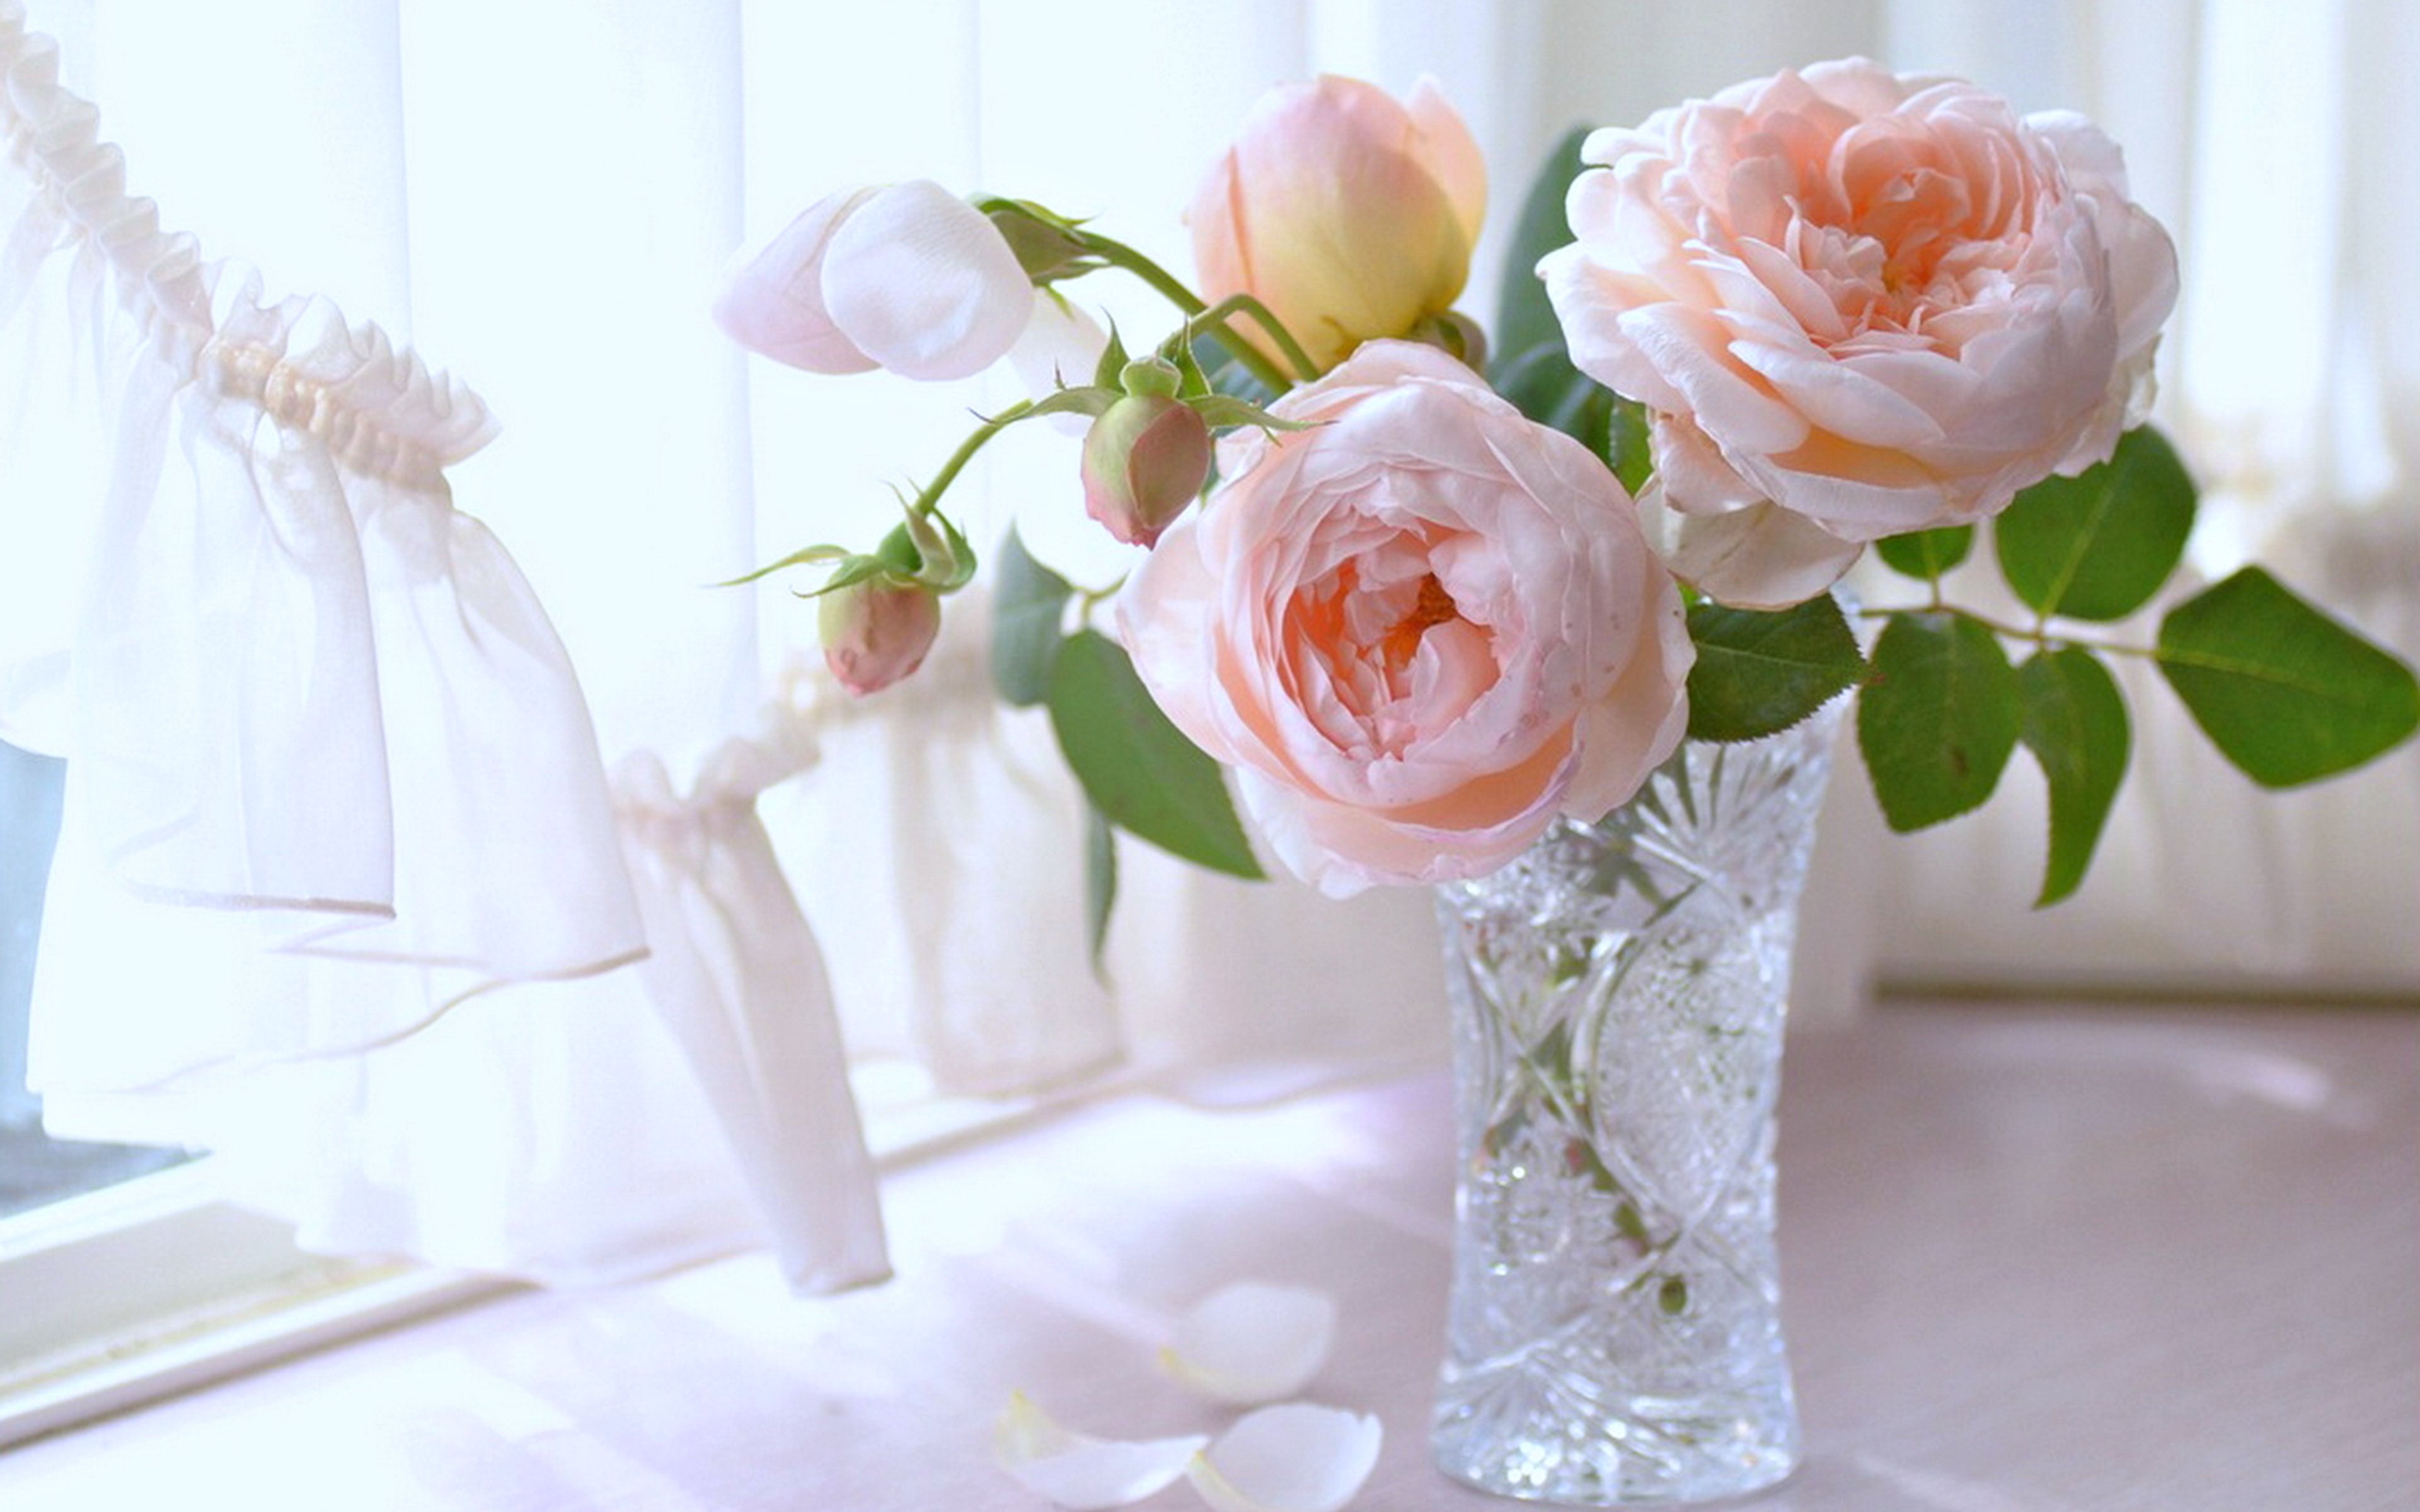 flowers, Roses, Vase, Windows, Curtains, Houses, Woman, Relax, Love, Romantice Wallpaper